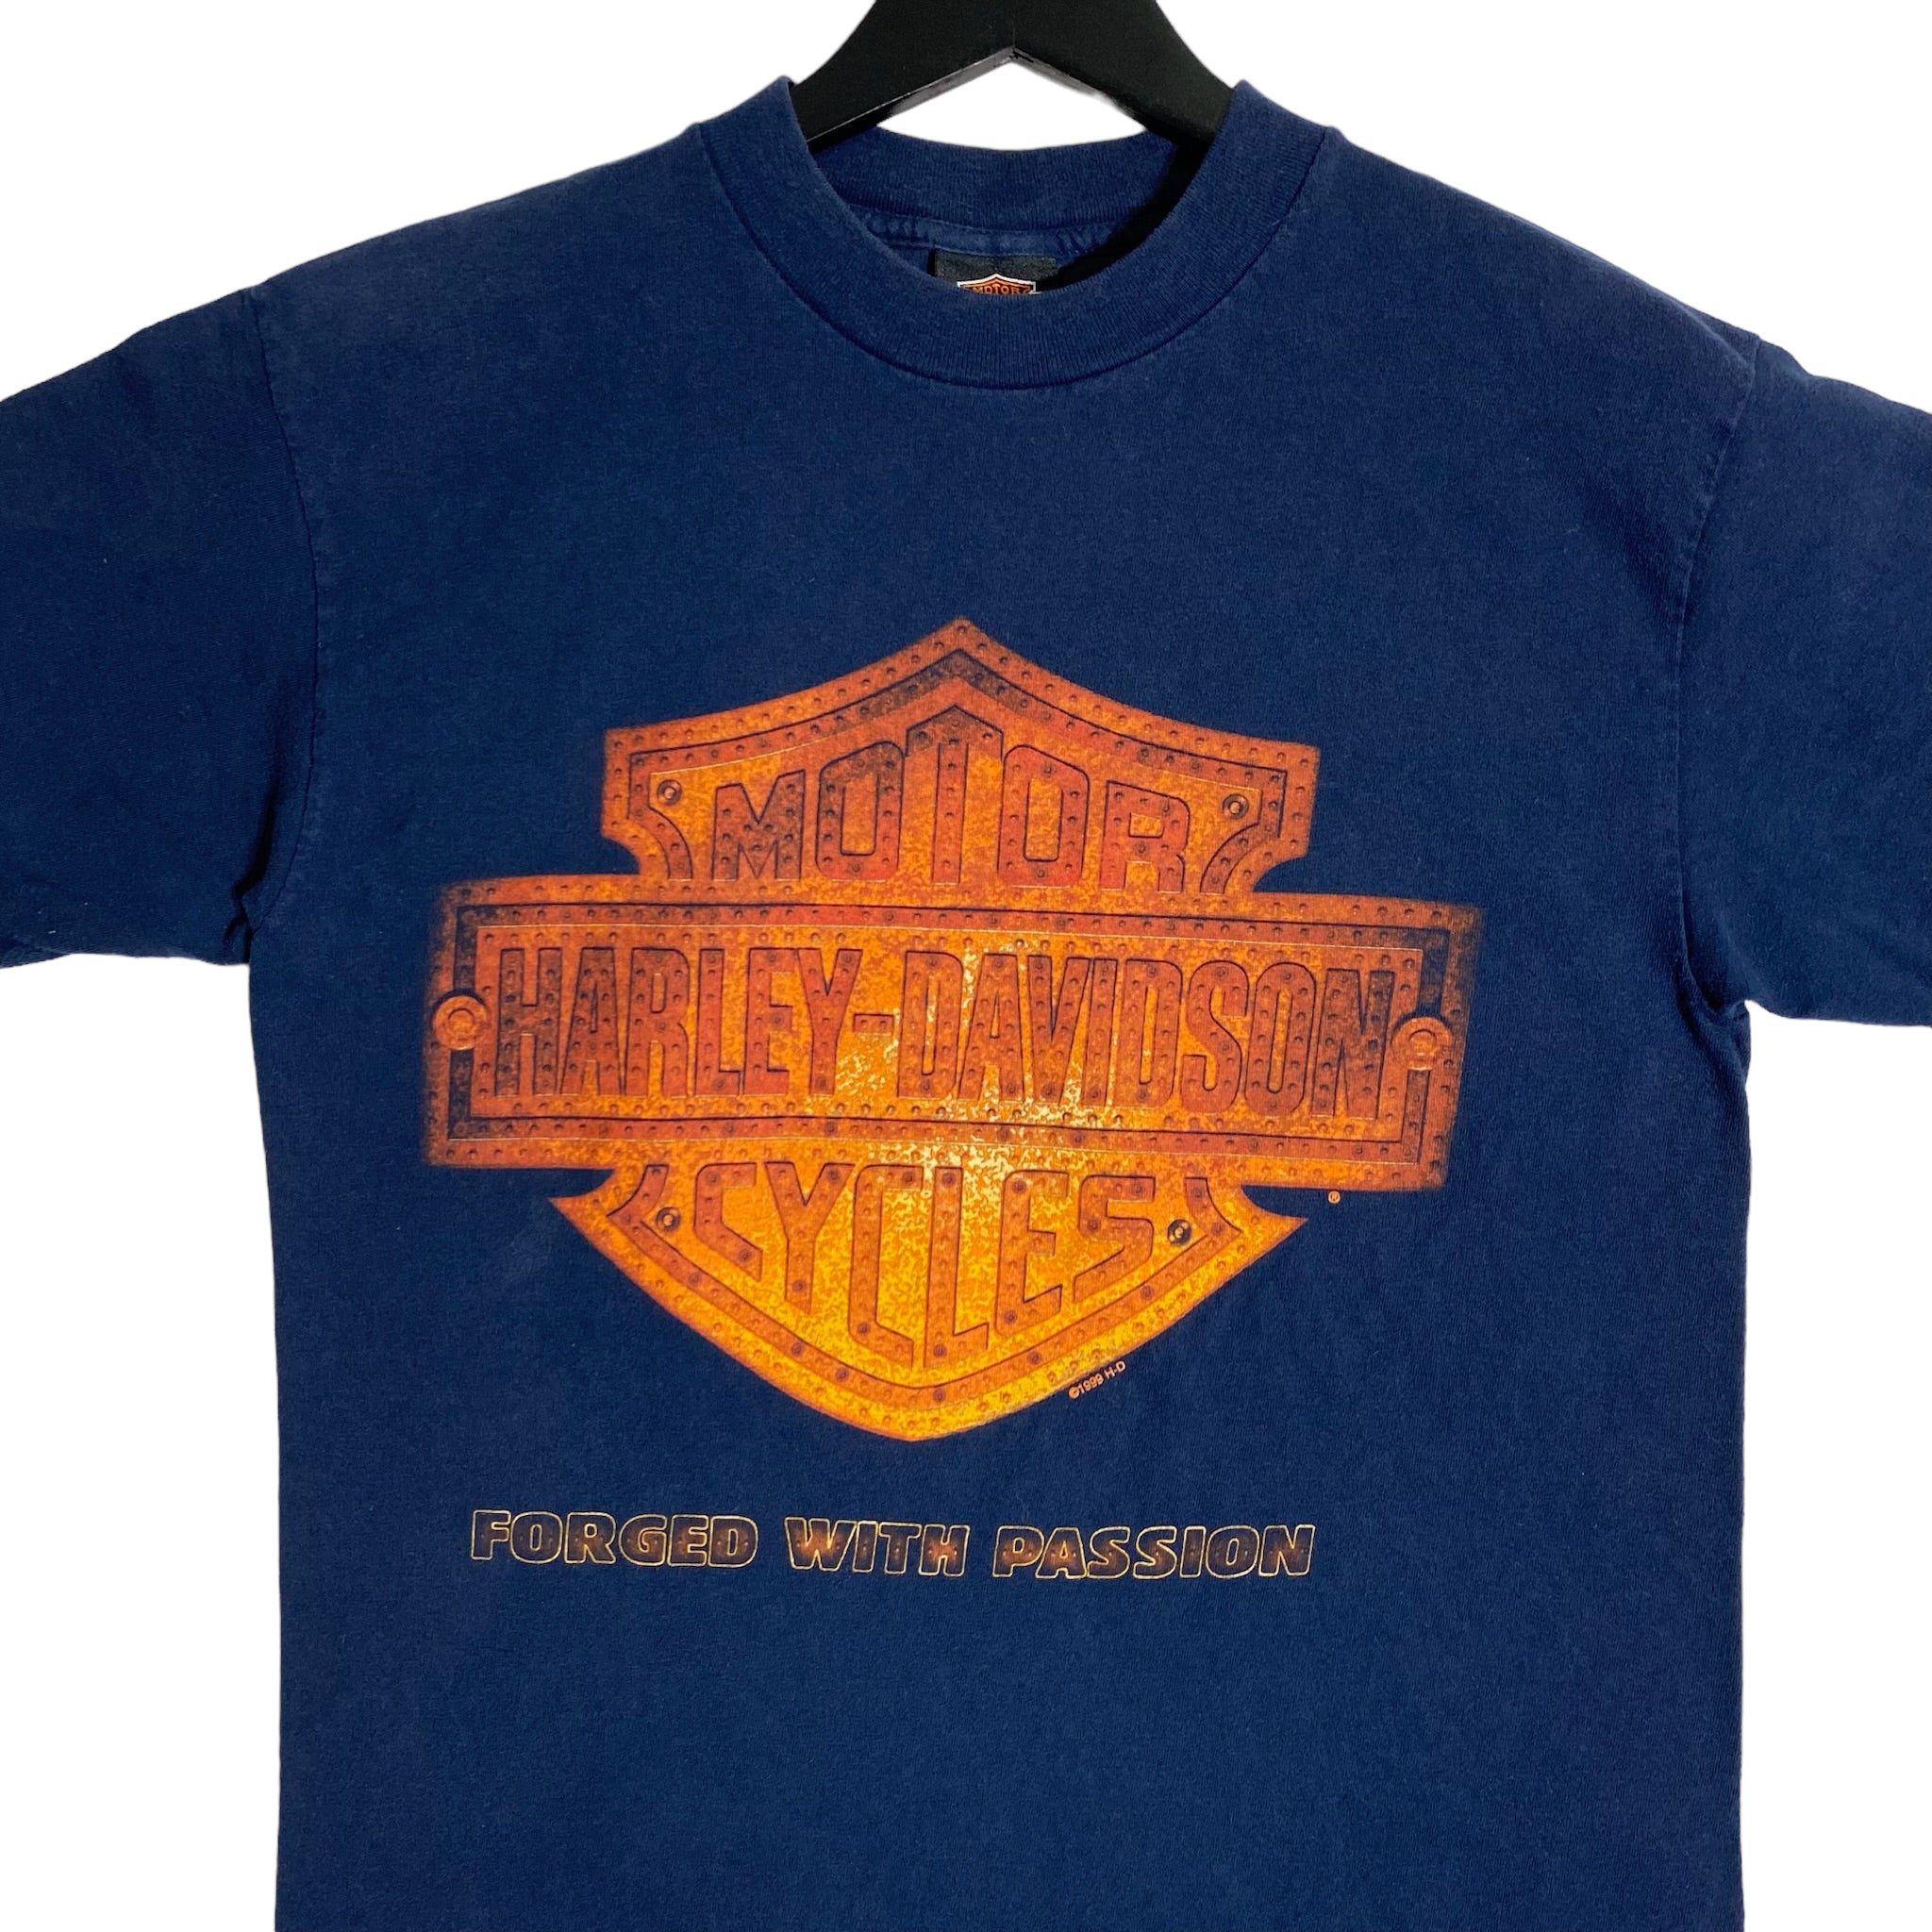 Vintage Harley Davidson "Forged With Passion" Tee 2000